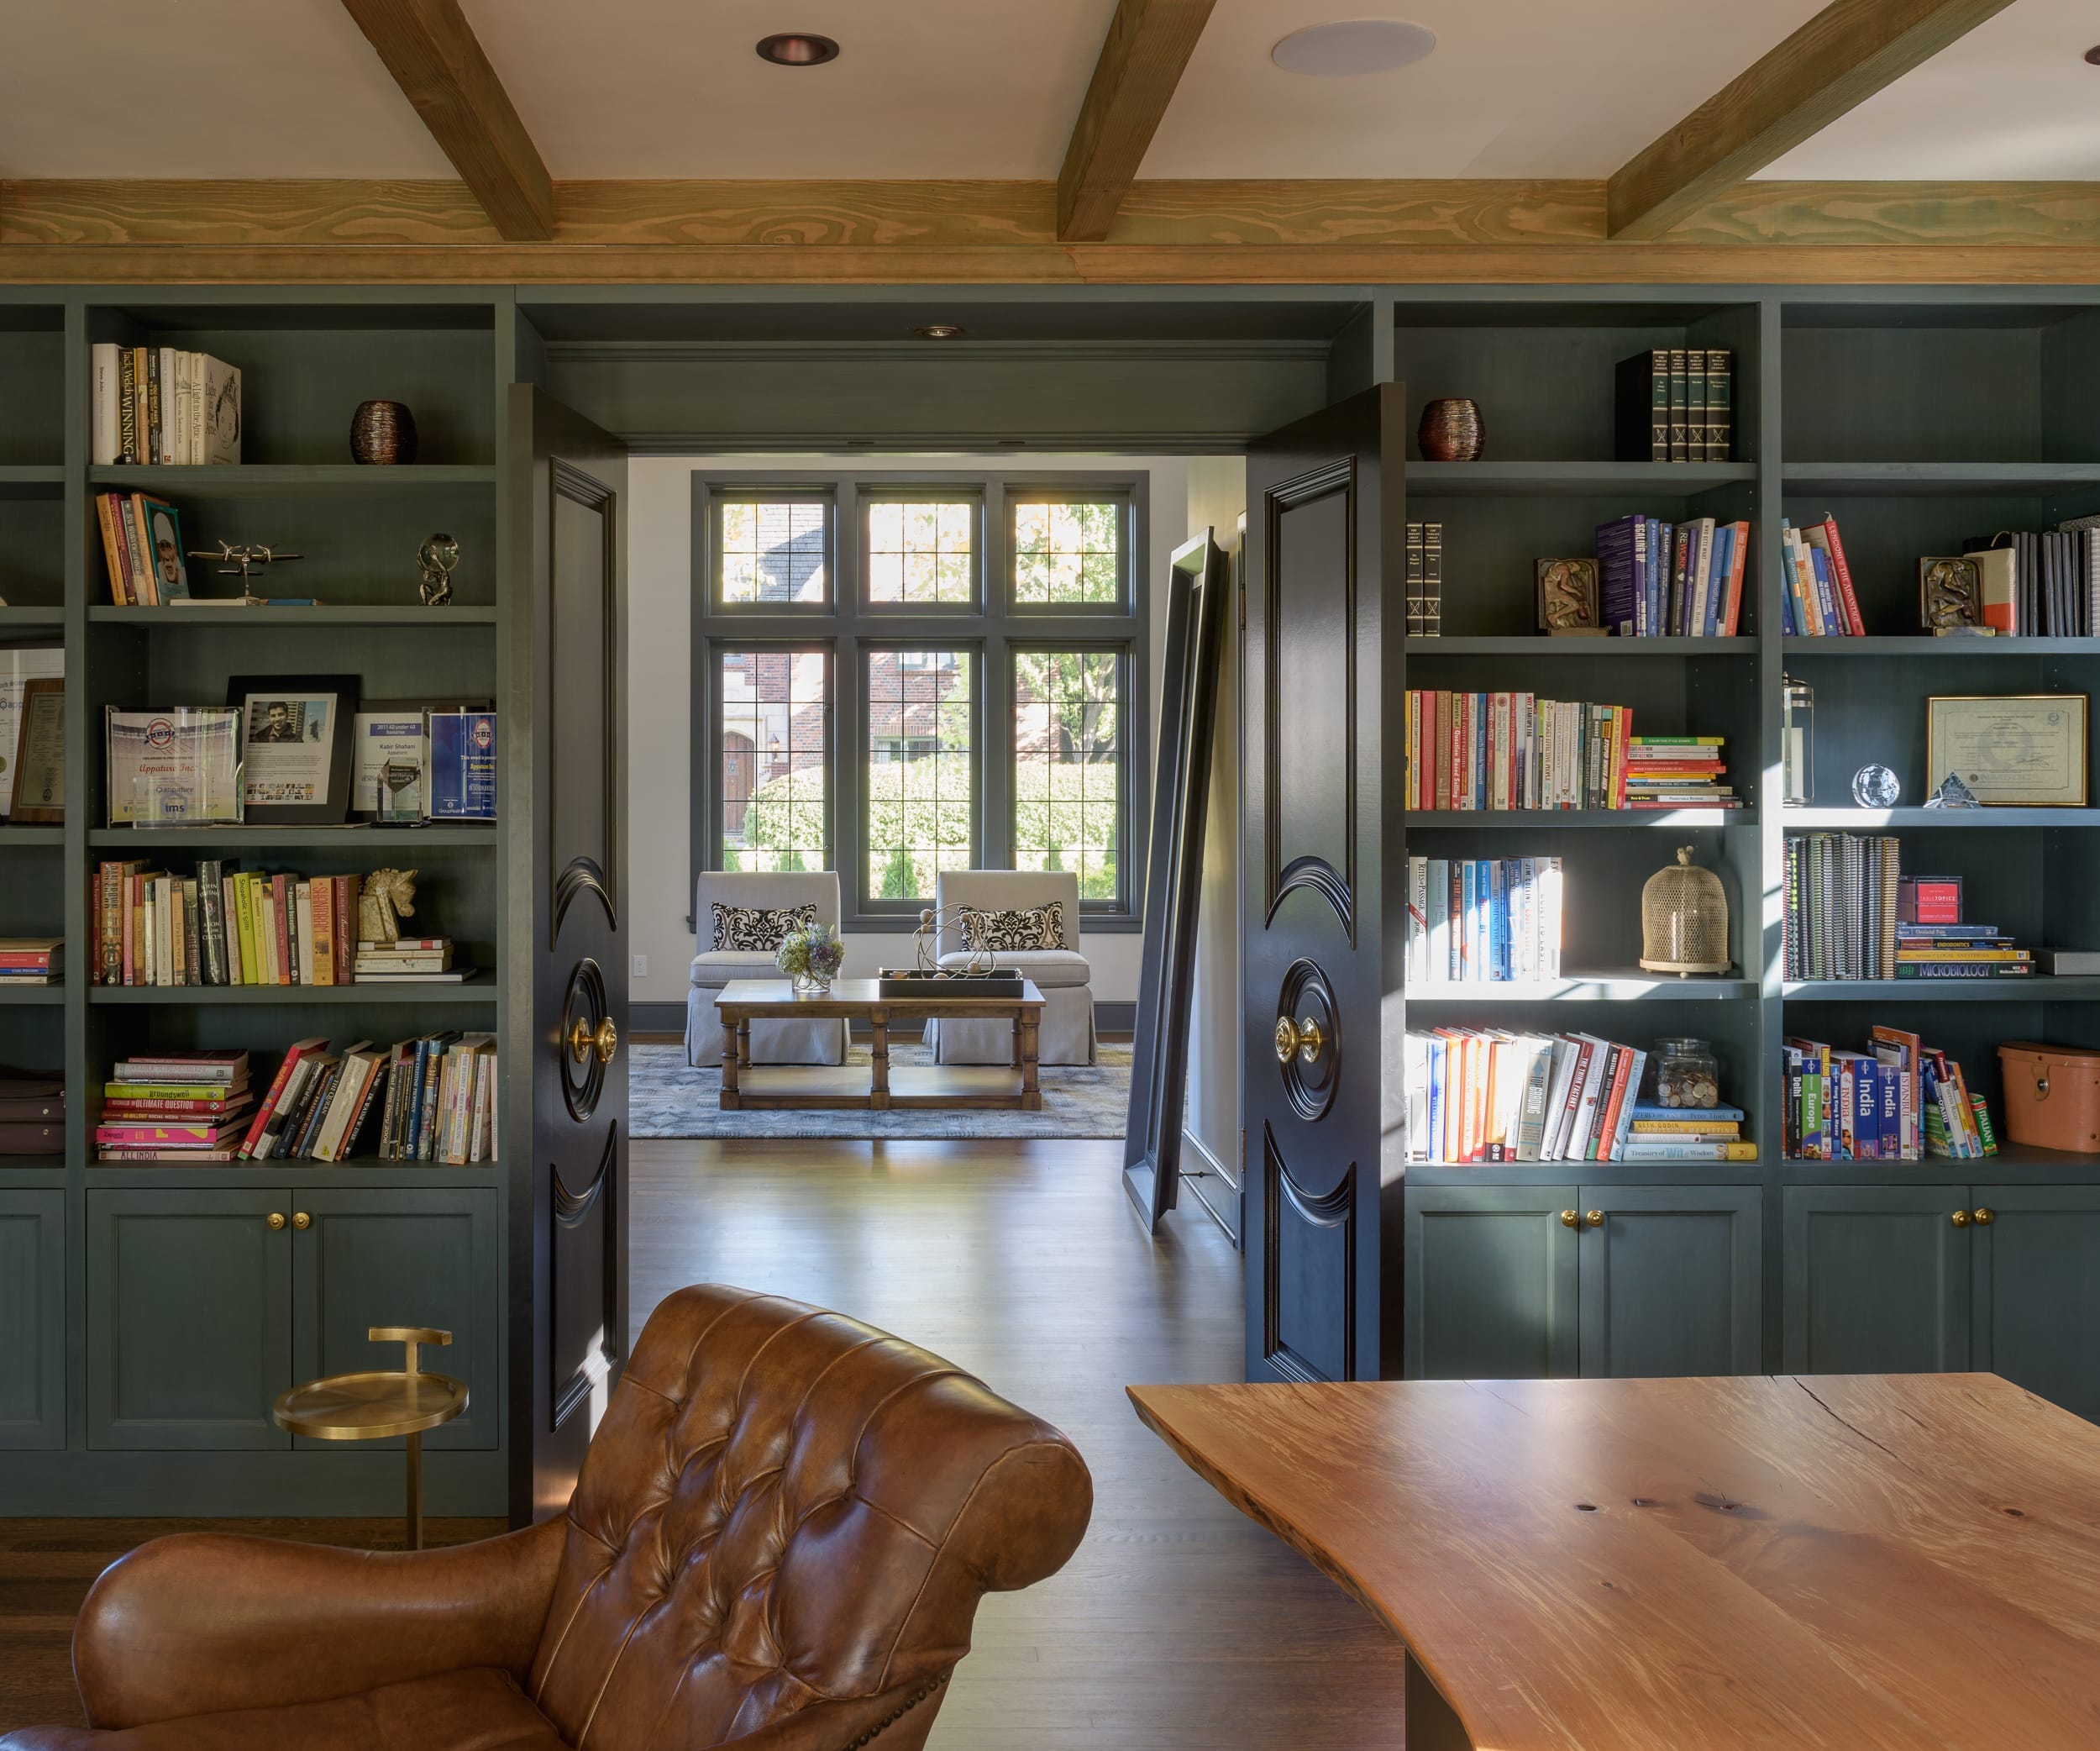 A home office with bookshelves and a leather chair.